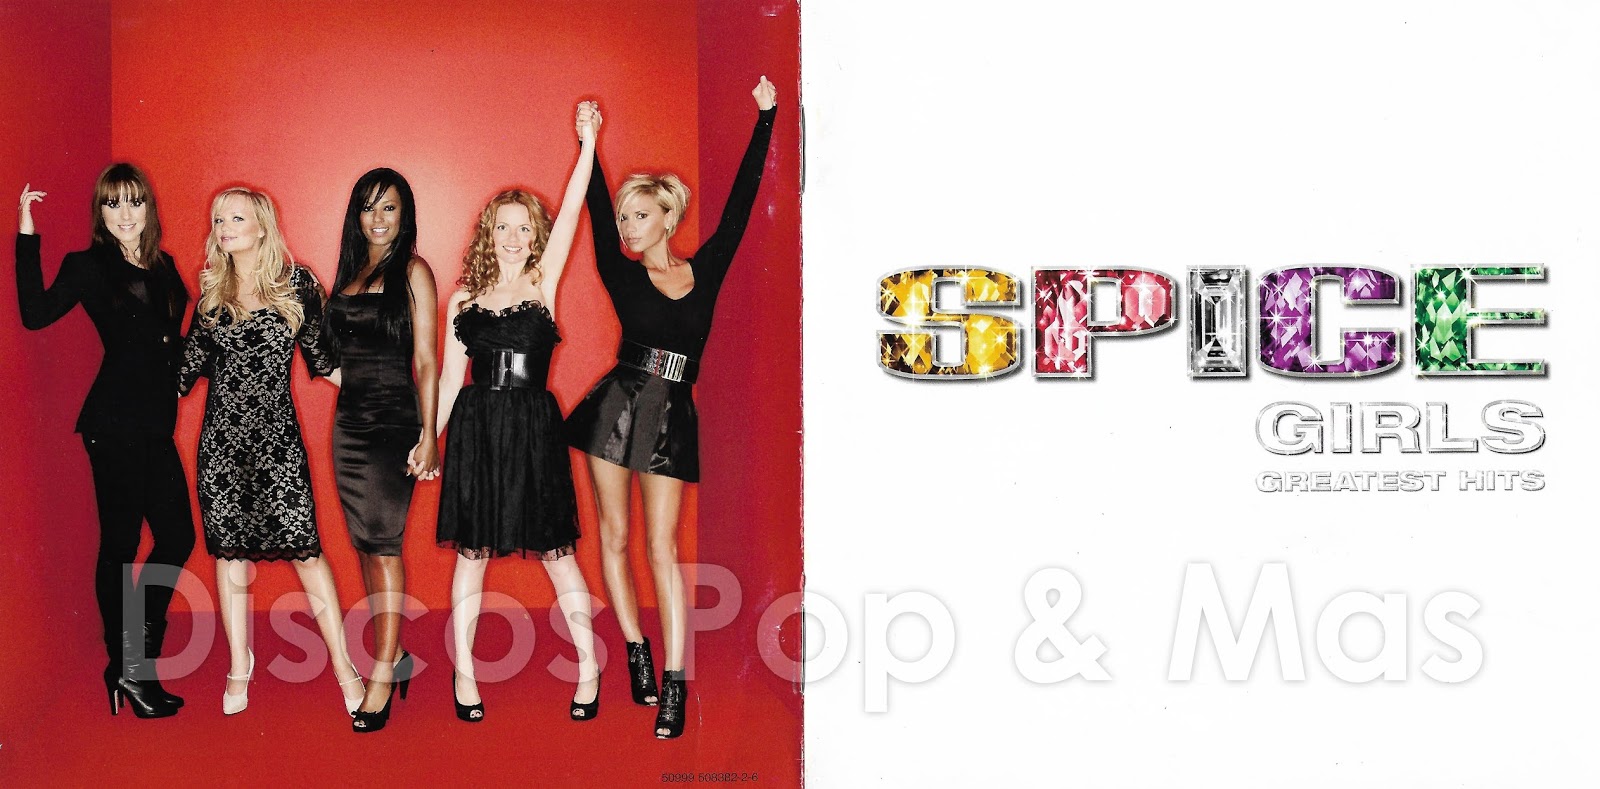 Discos Pop And Mas Spice Girls Greatest Hits